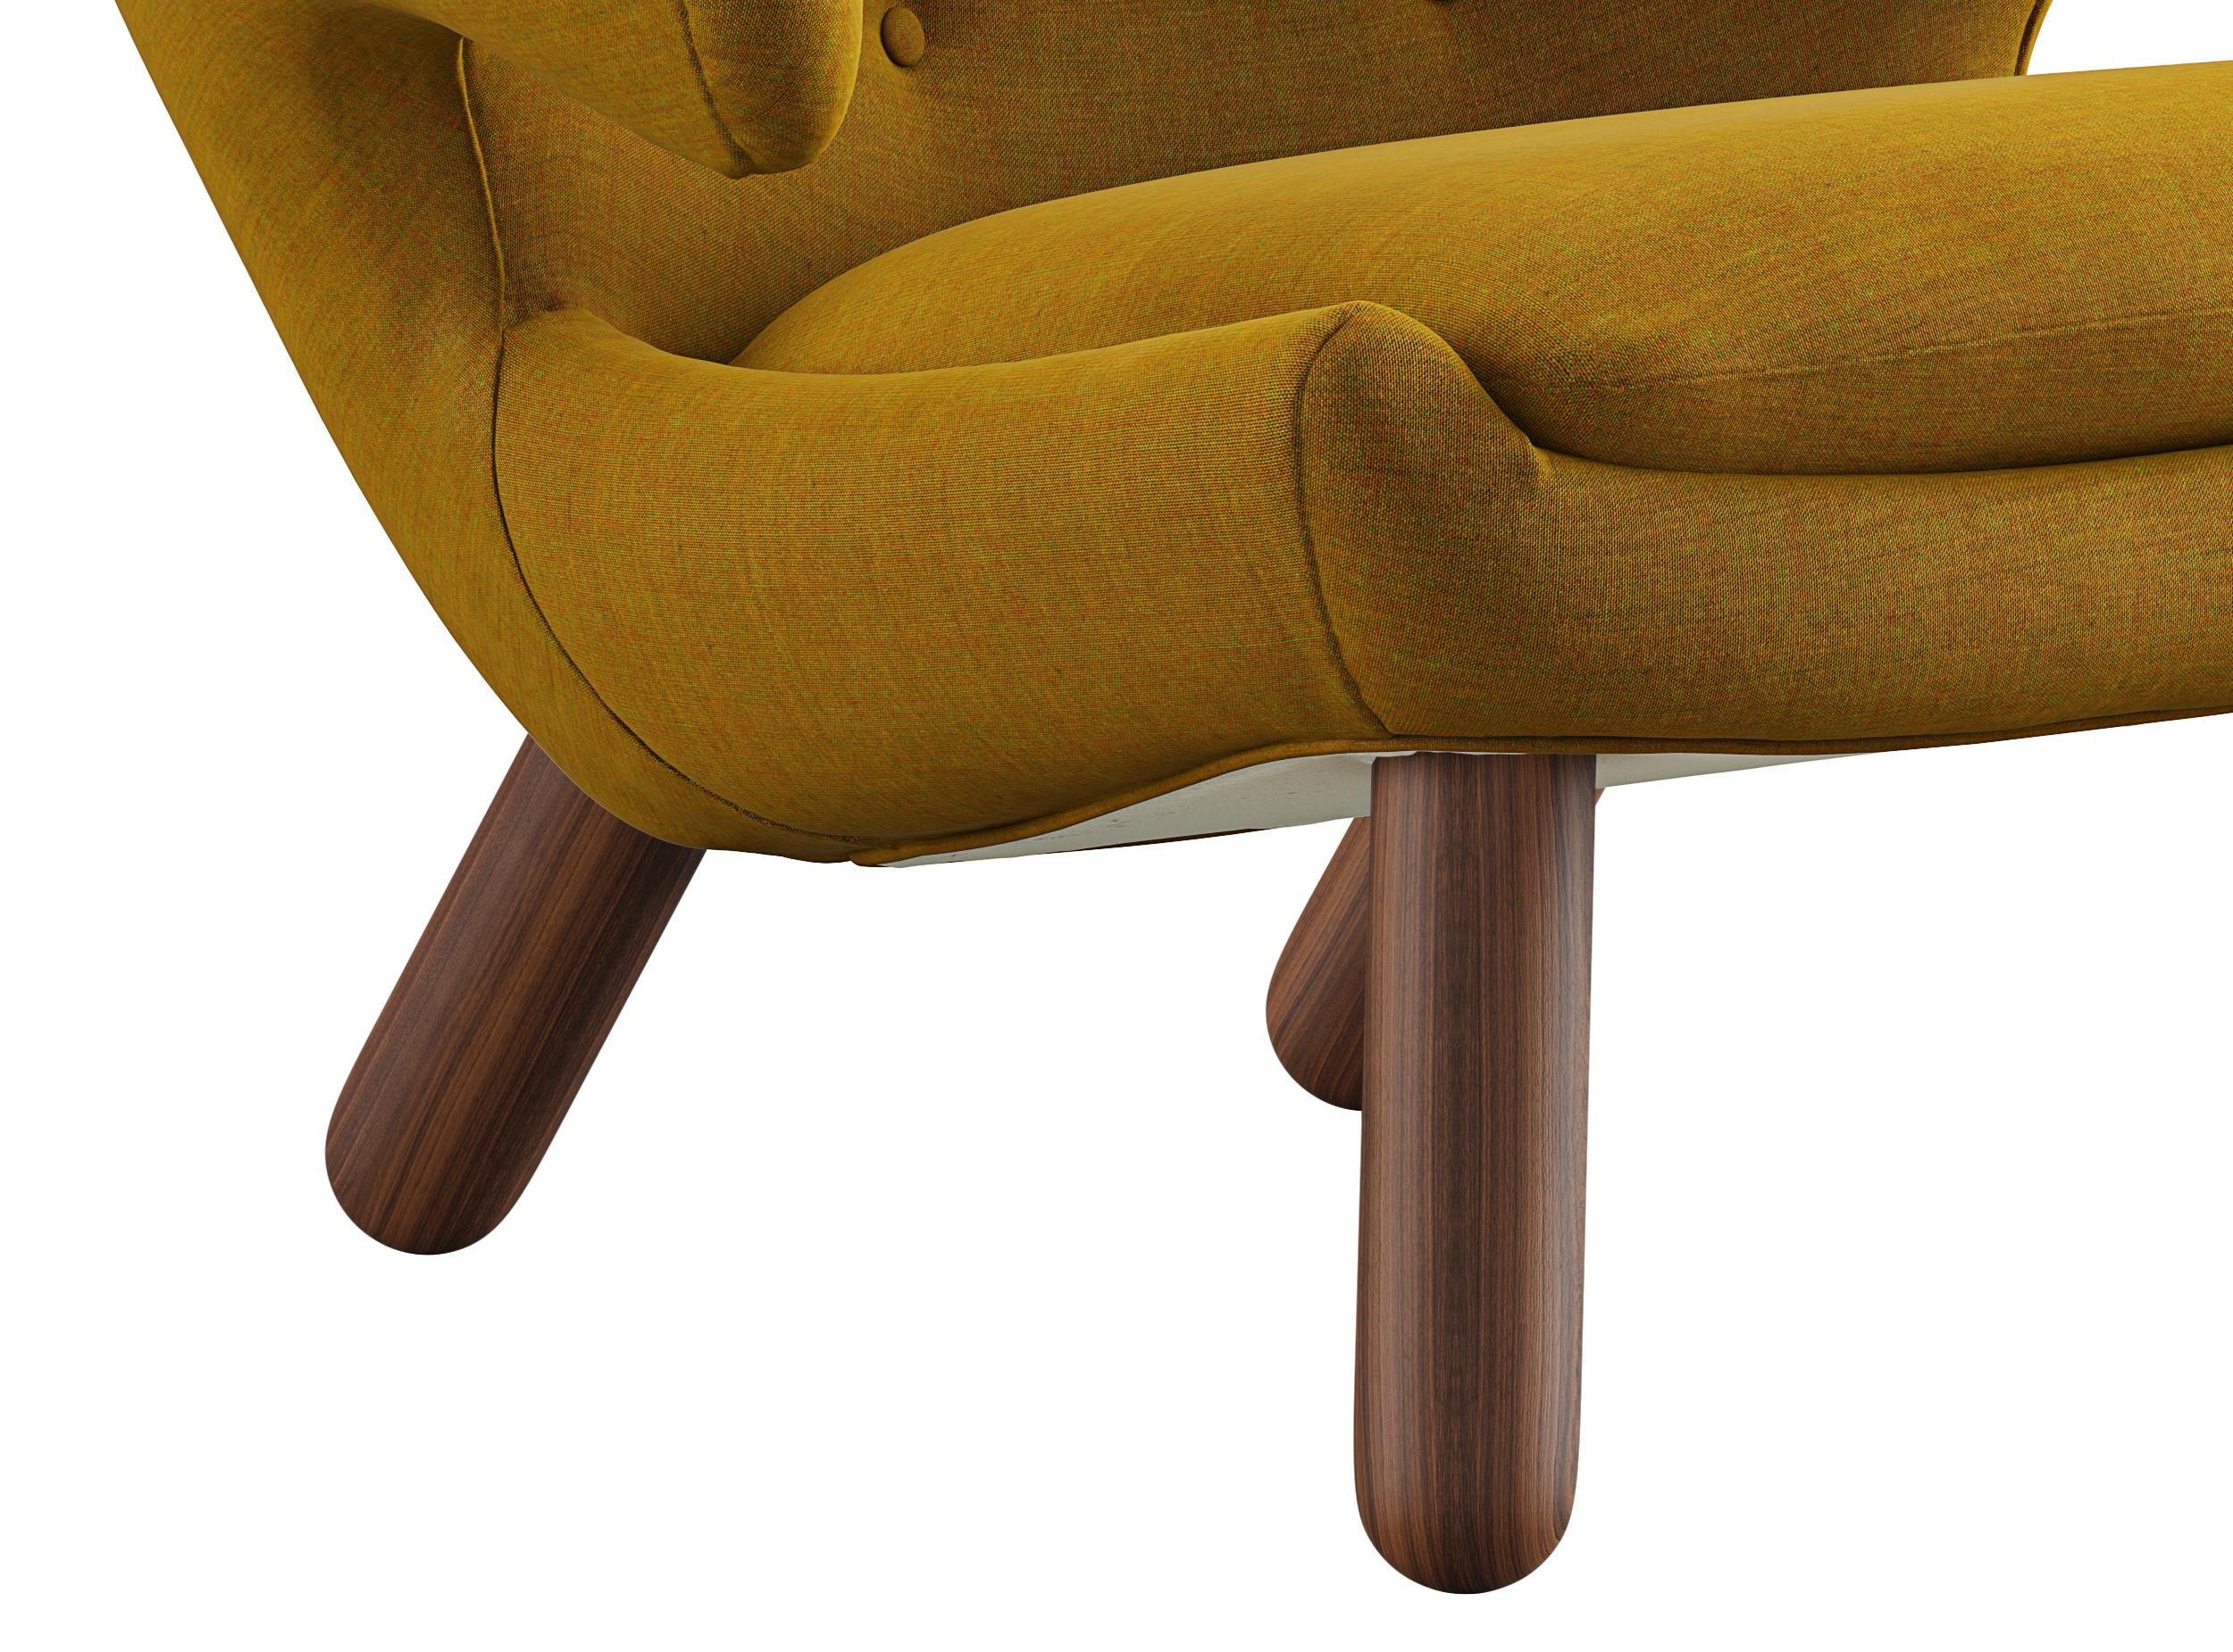 Contemporary Finn Juhl Pelican Chair Upholstered in Wood and Fabric